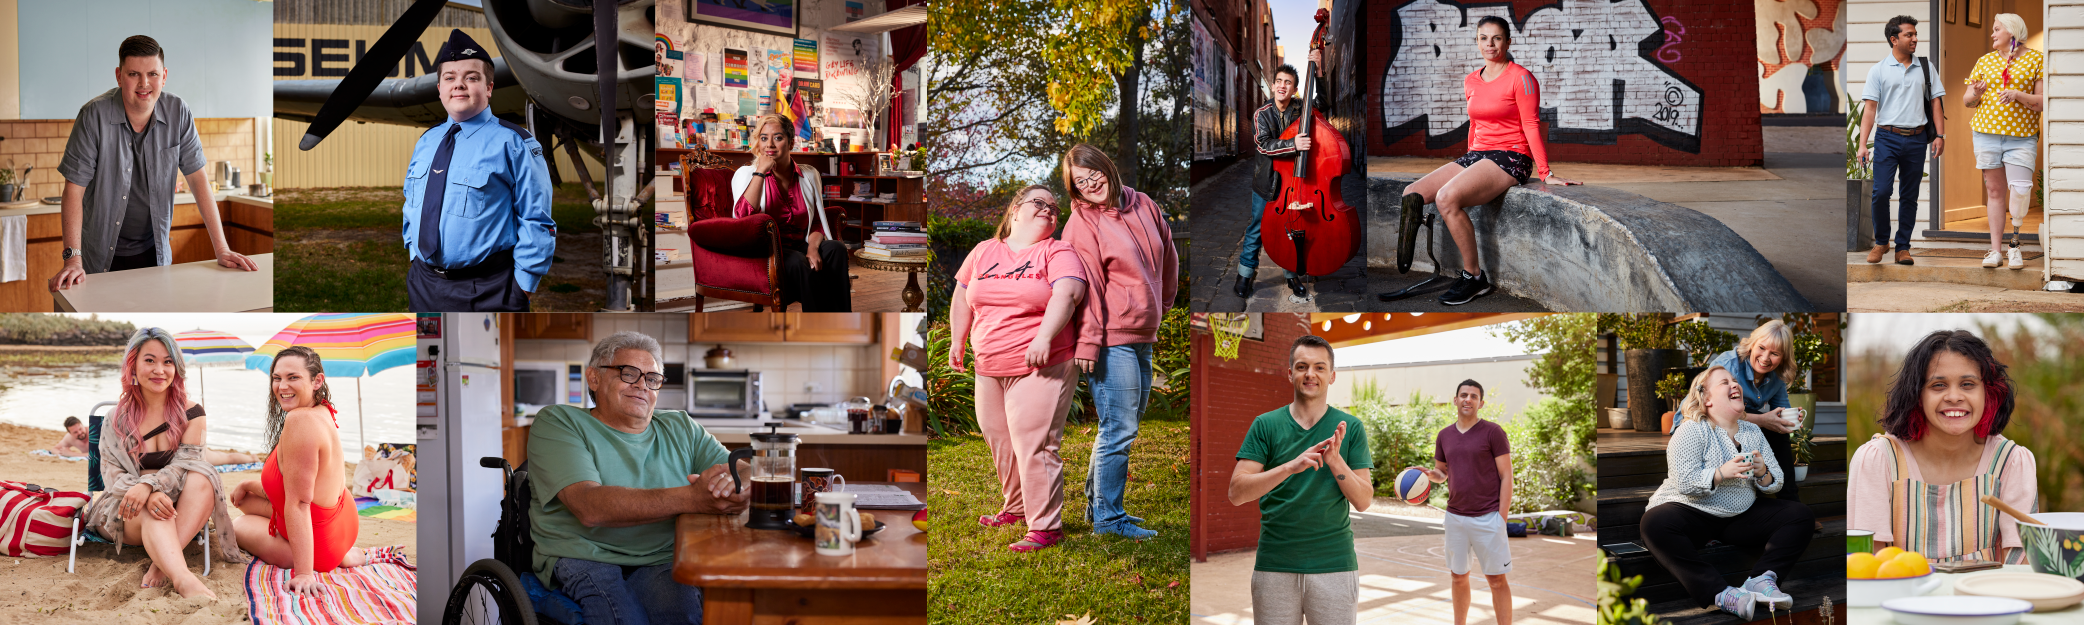 A collage of images showing various people with disability who are participants in the NDIS.